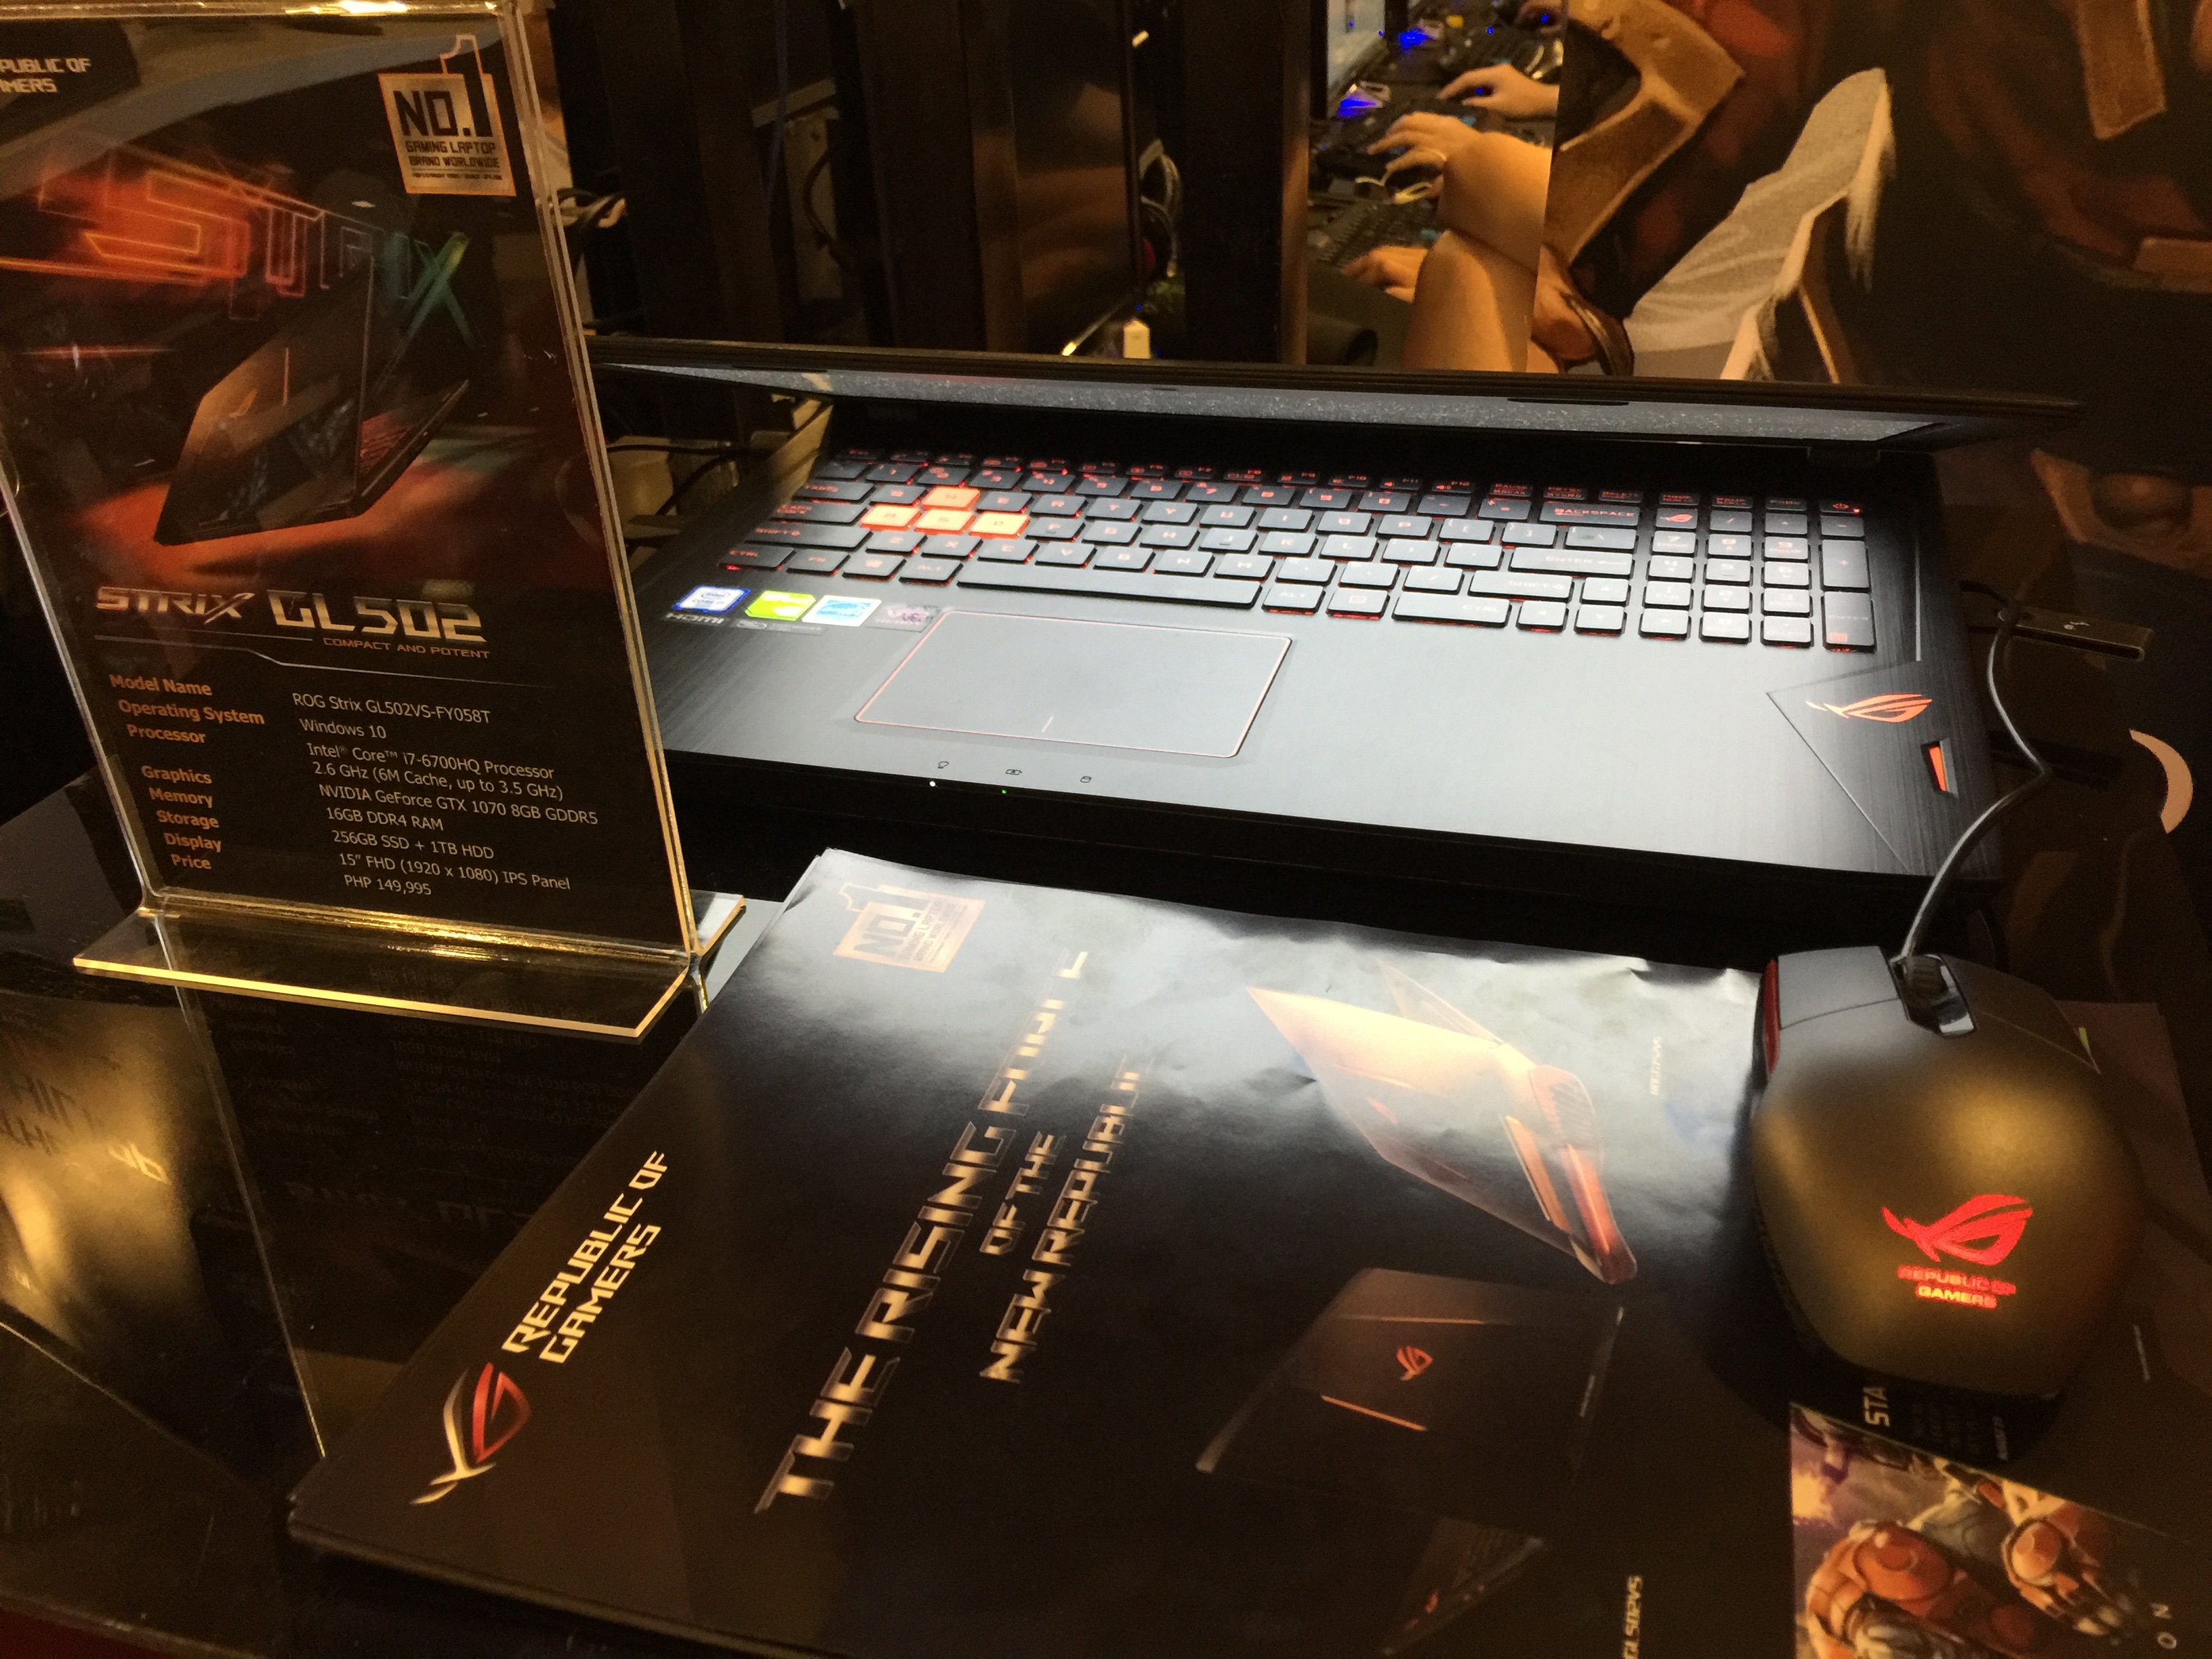 Asus ROG GL502 in the flesh!